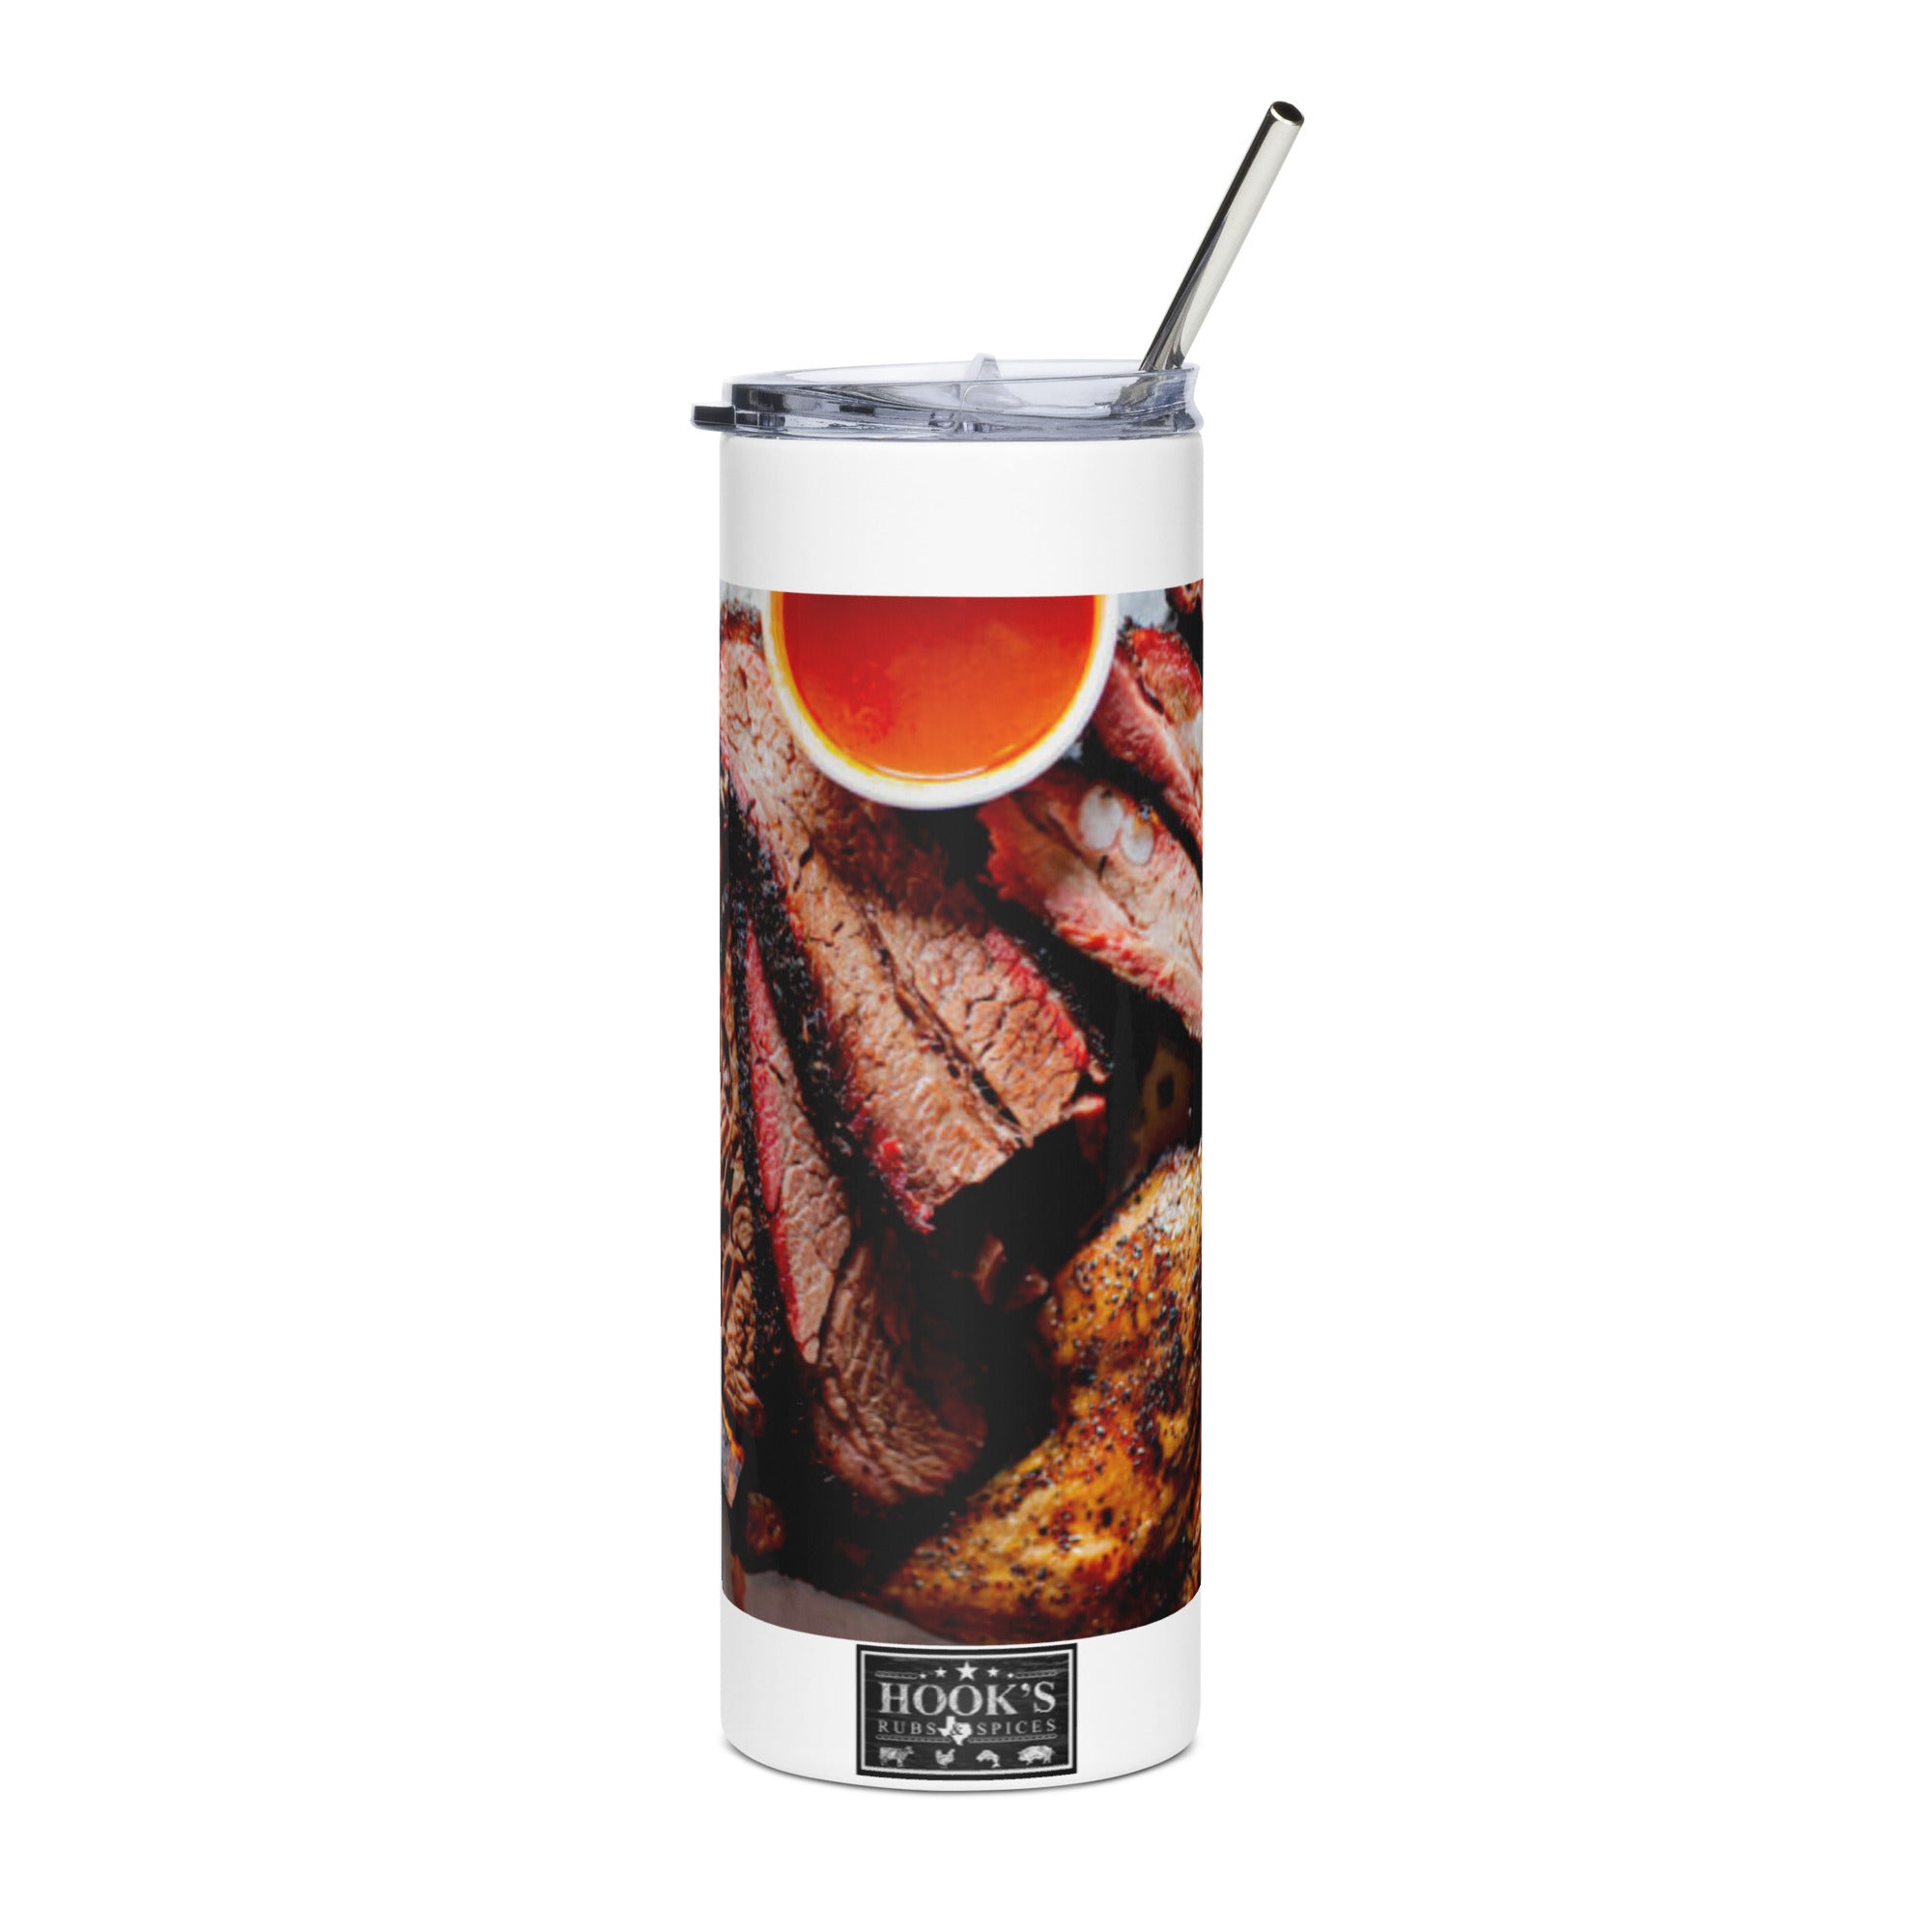 Meat Drippings - 20 oz Stainless steel tumbler